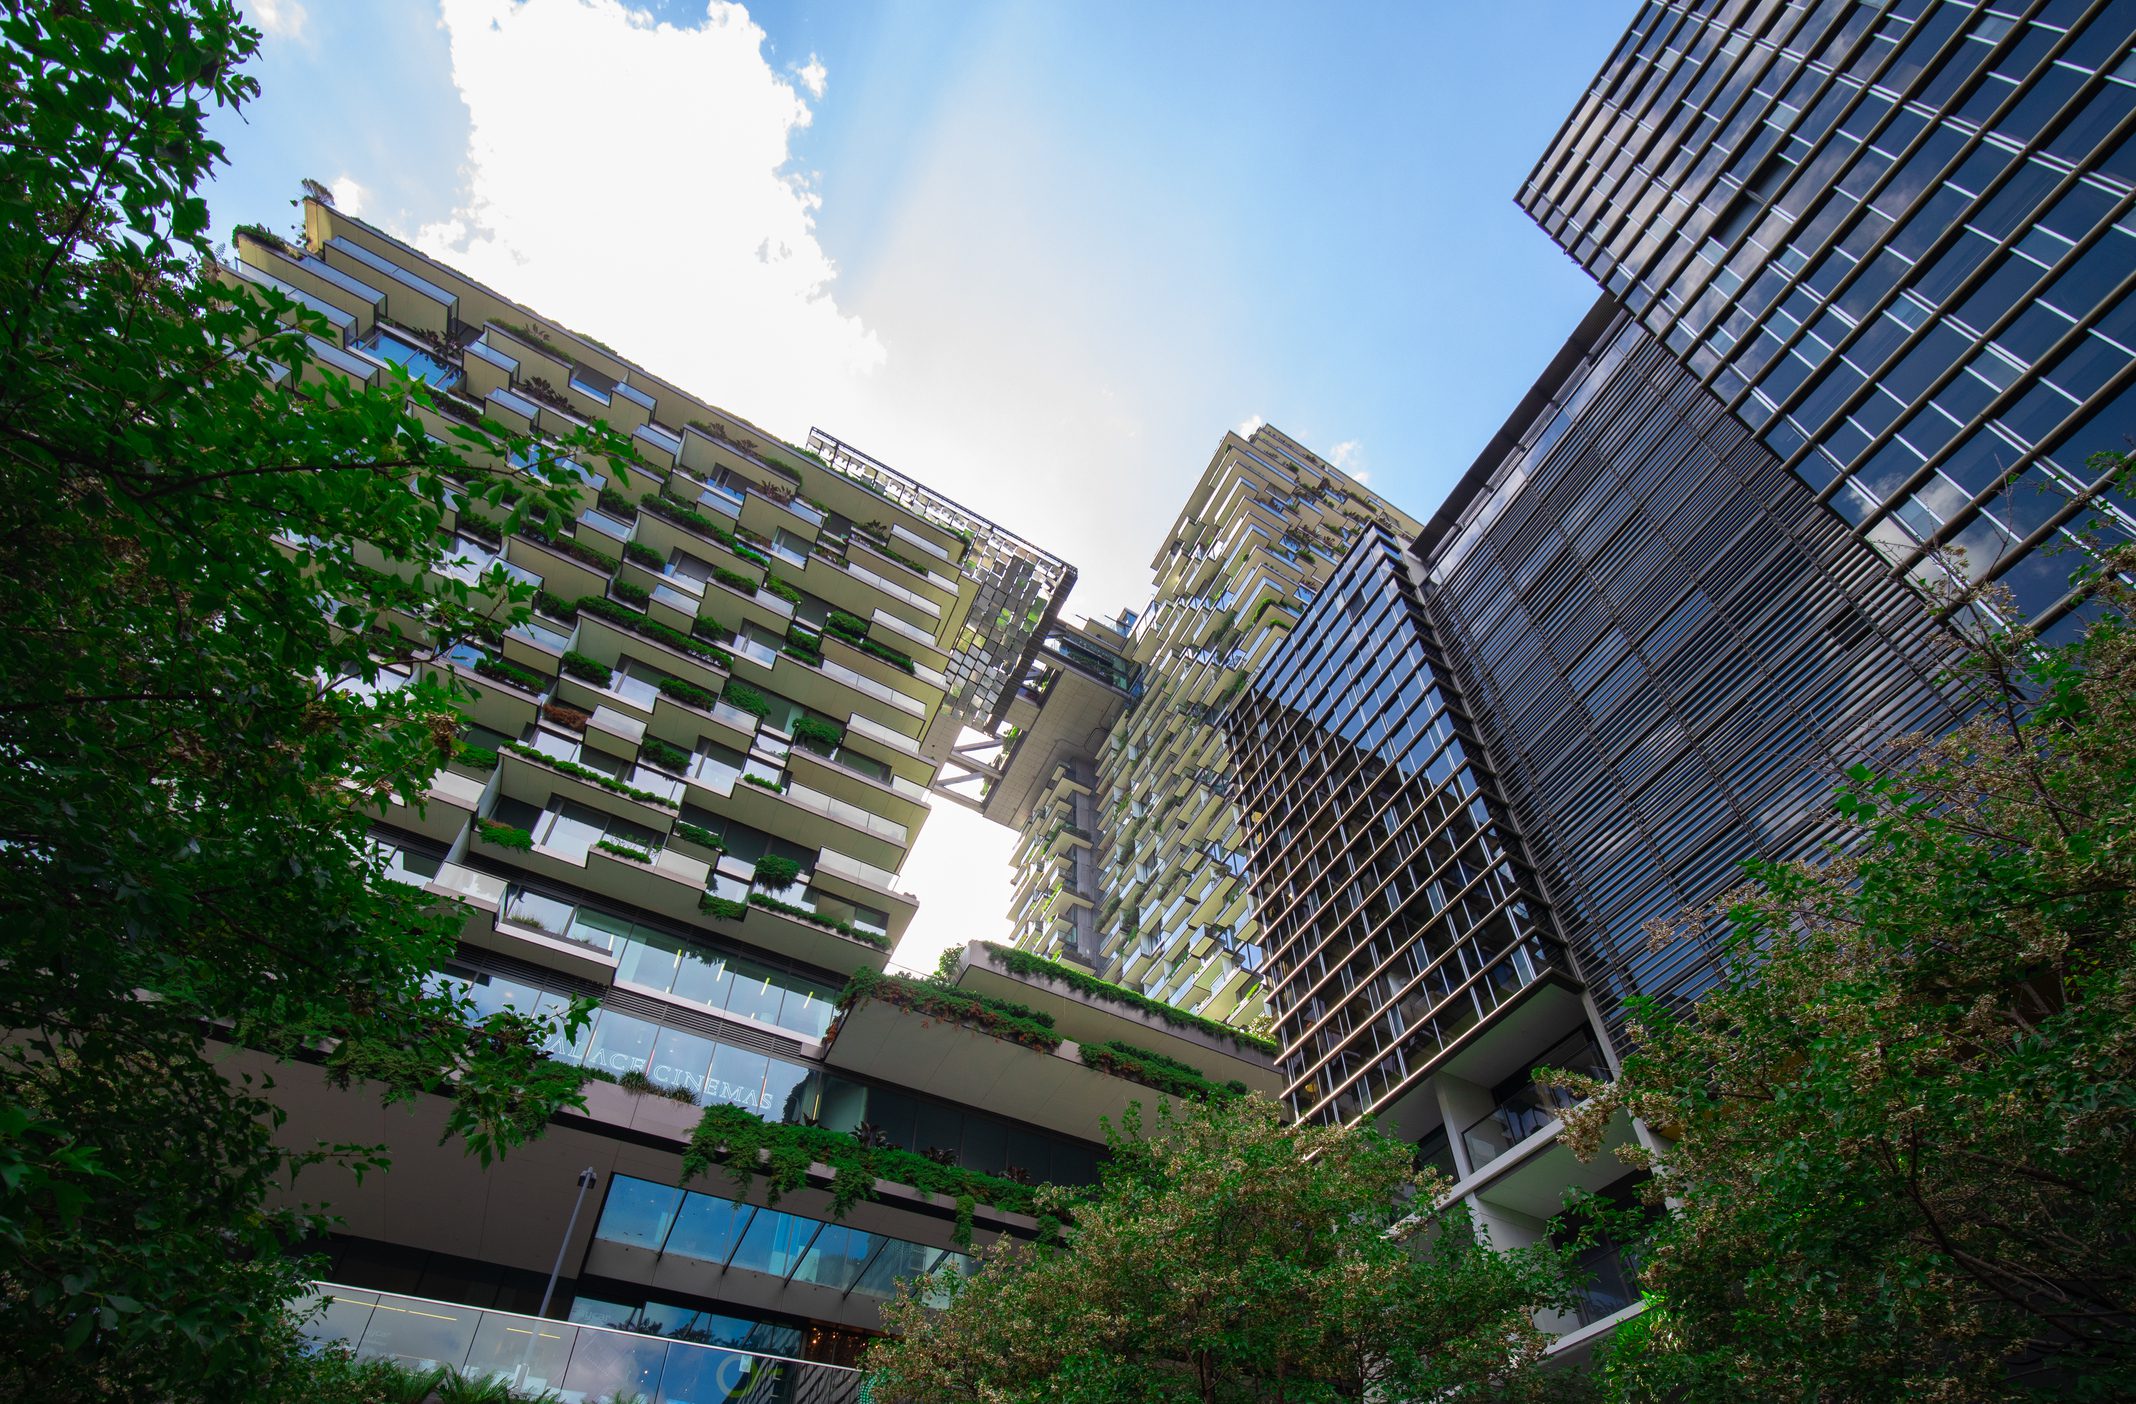 apartment block in sydney nsw australia with hanging gardens and plants on exterior of the building